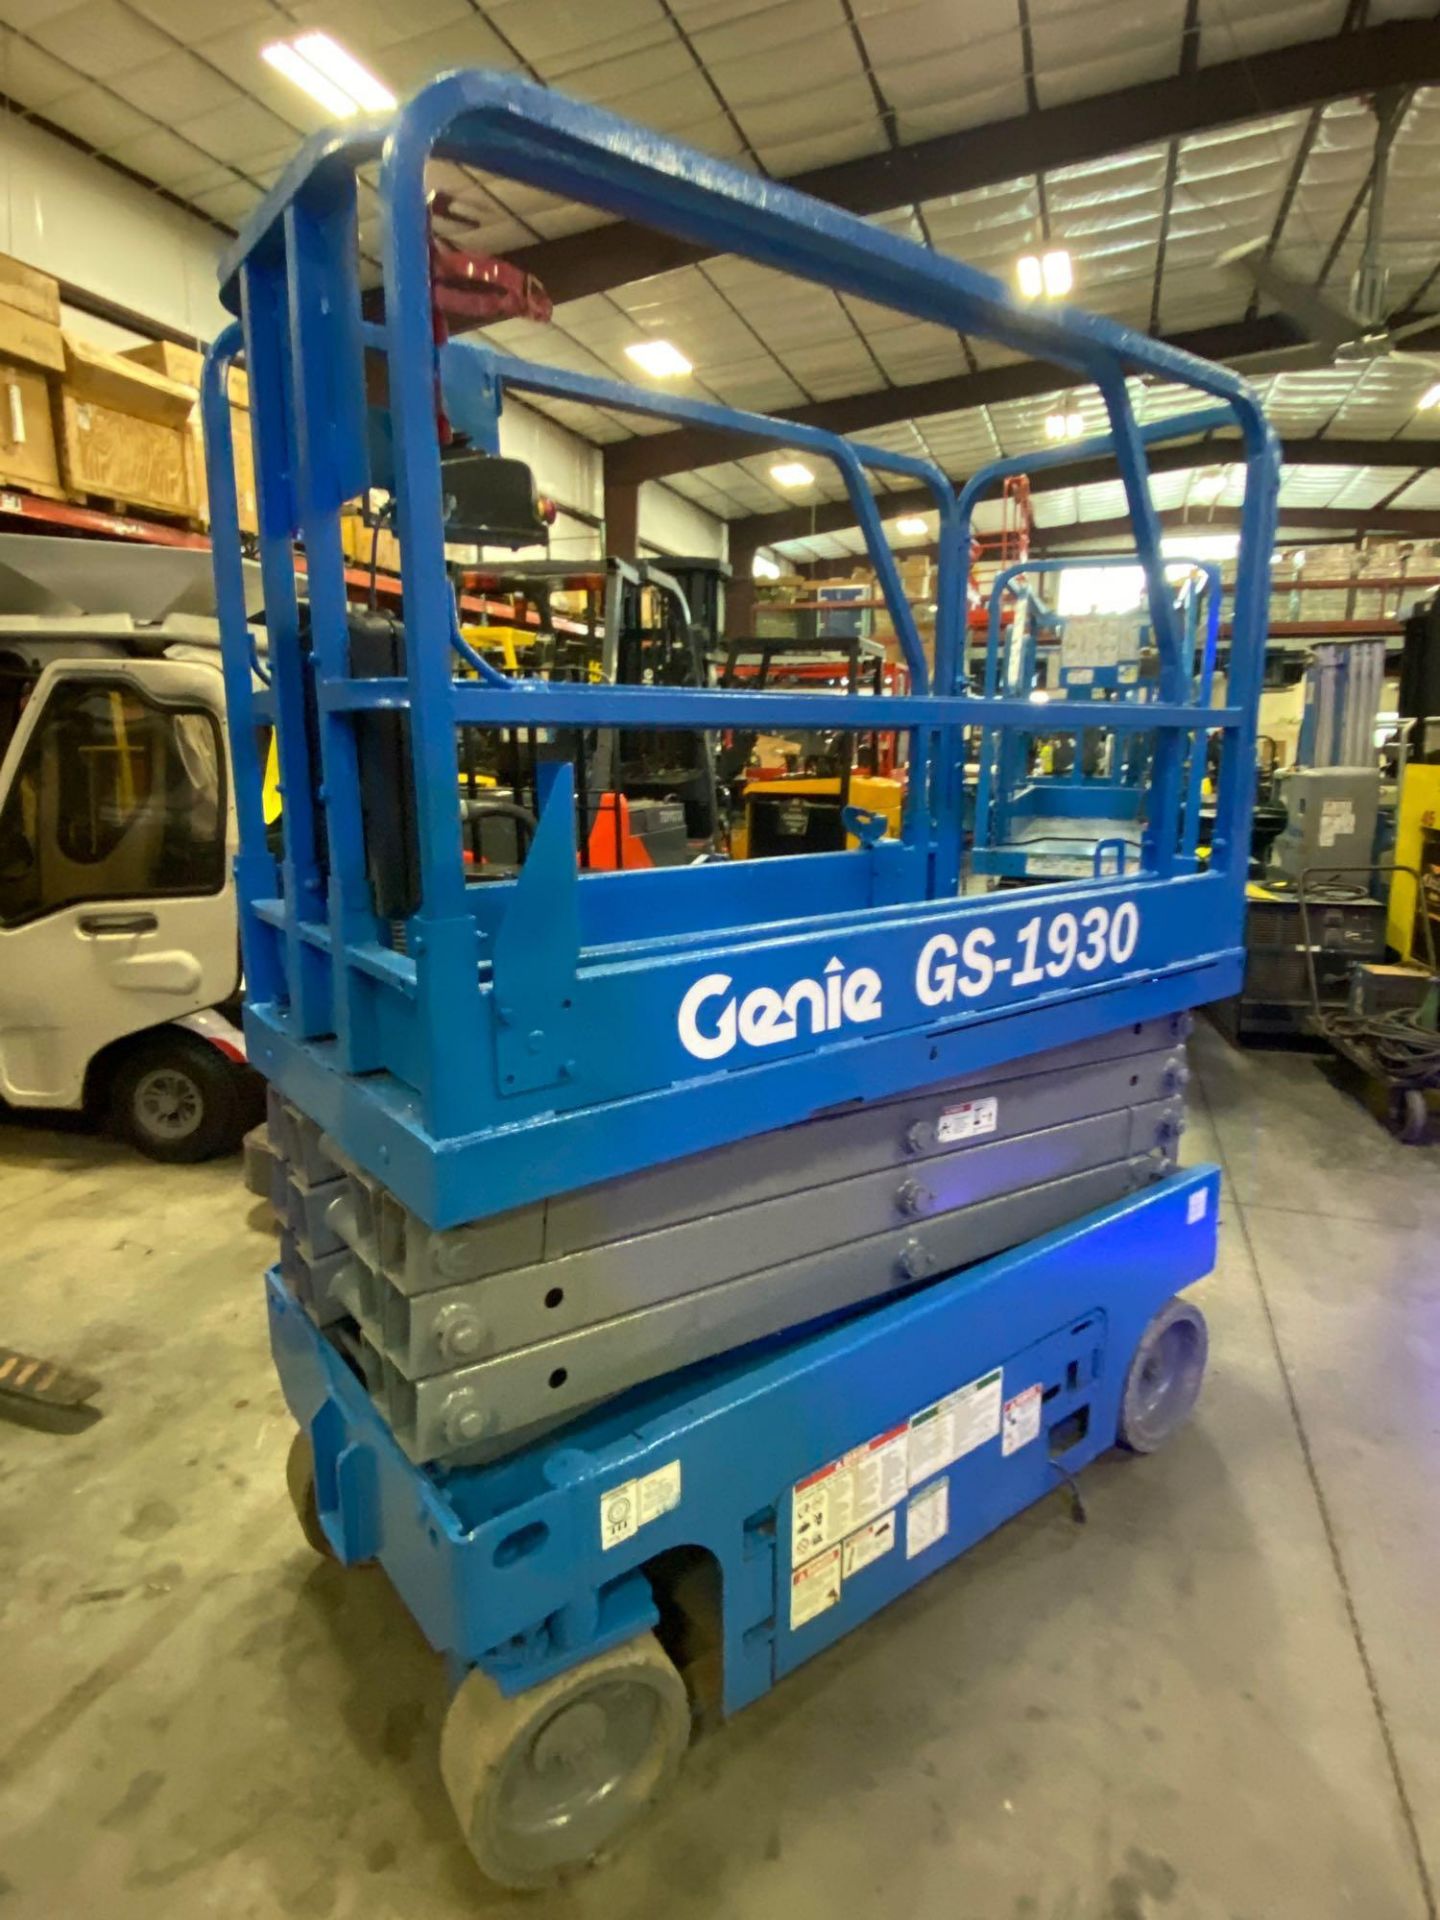 GENIE GS-1930 ELECTRIC SCISSOR LIFT, SELF PROPELLED, 19' PLATFORM HEIGHT, BUILT IN BATTERY CHARGER, - Image 2 of 4